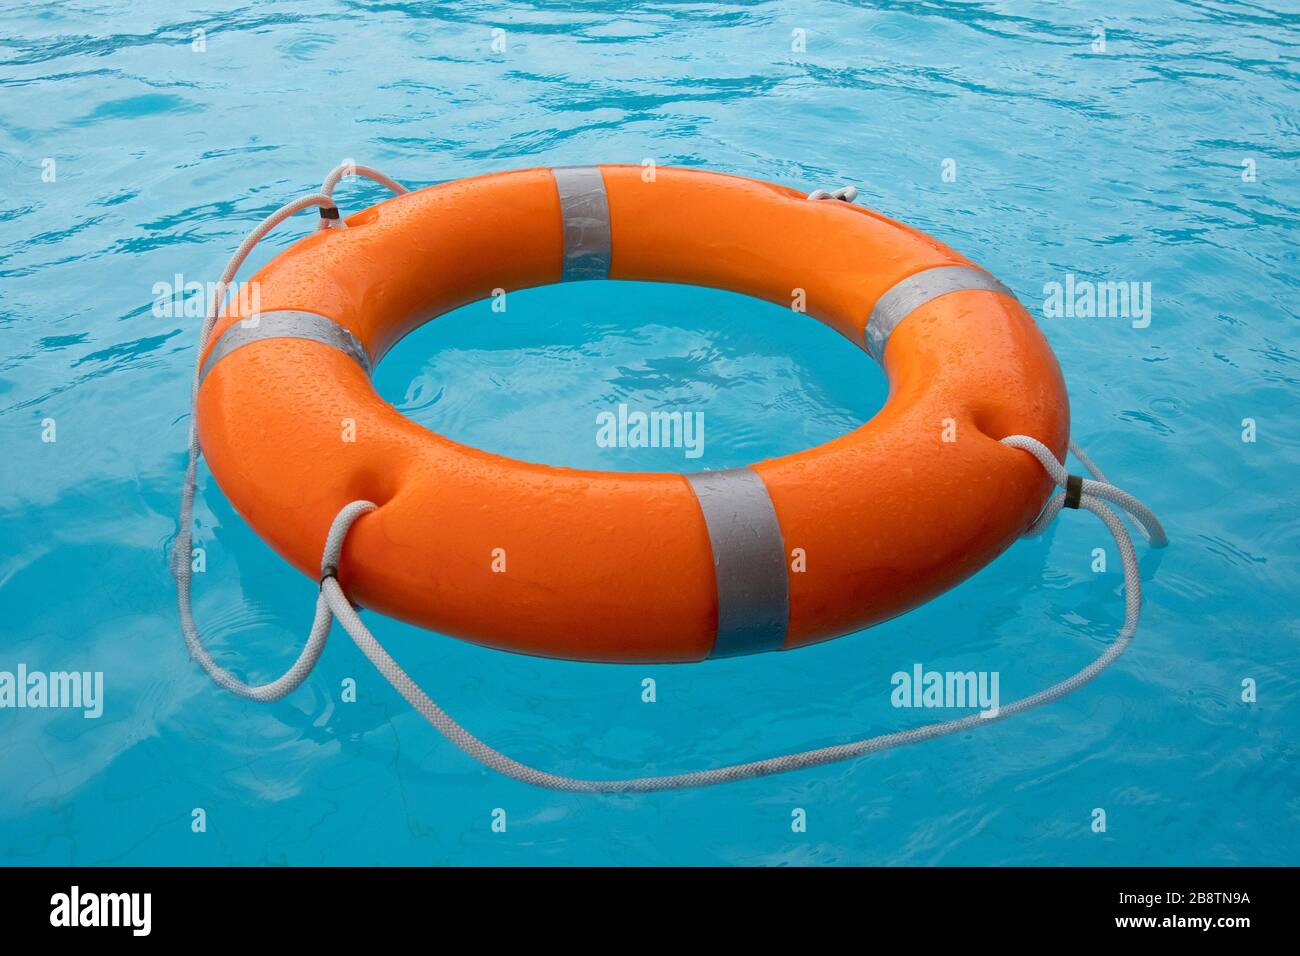 Orange lifebuoy in sea on water. Life ring floating on top of water. Life ring in ocean. Stock Photo